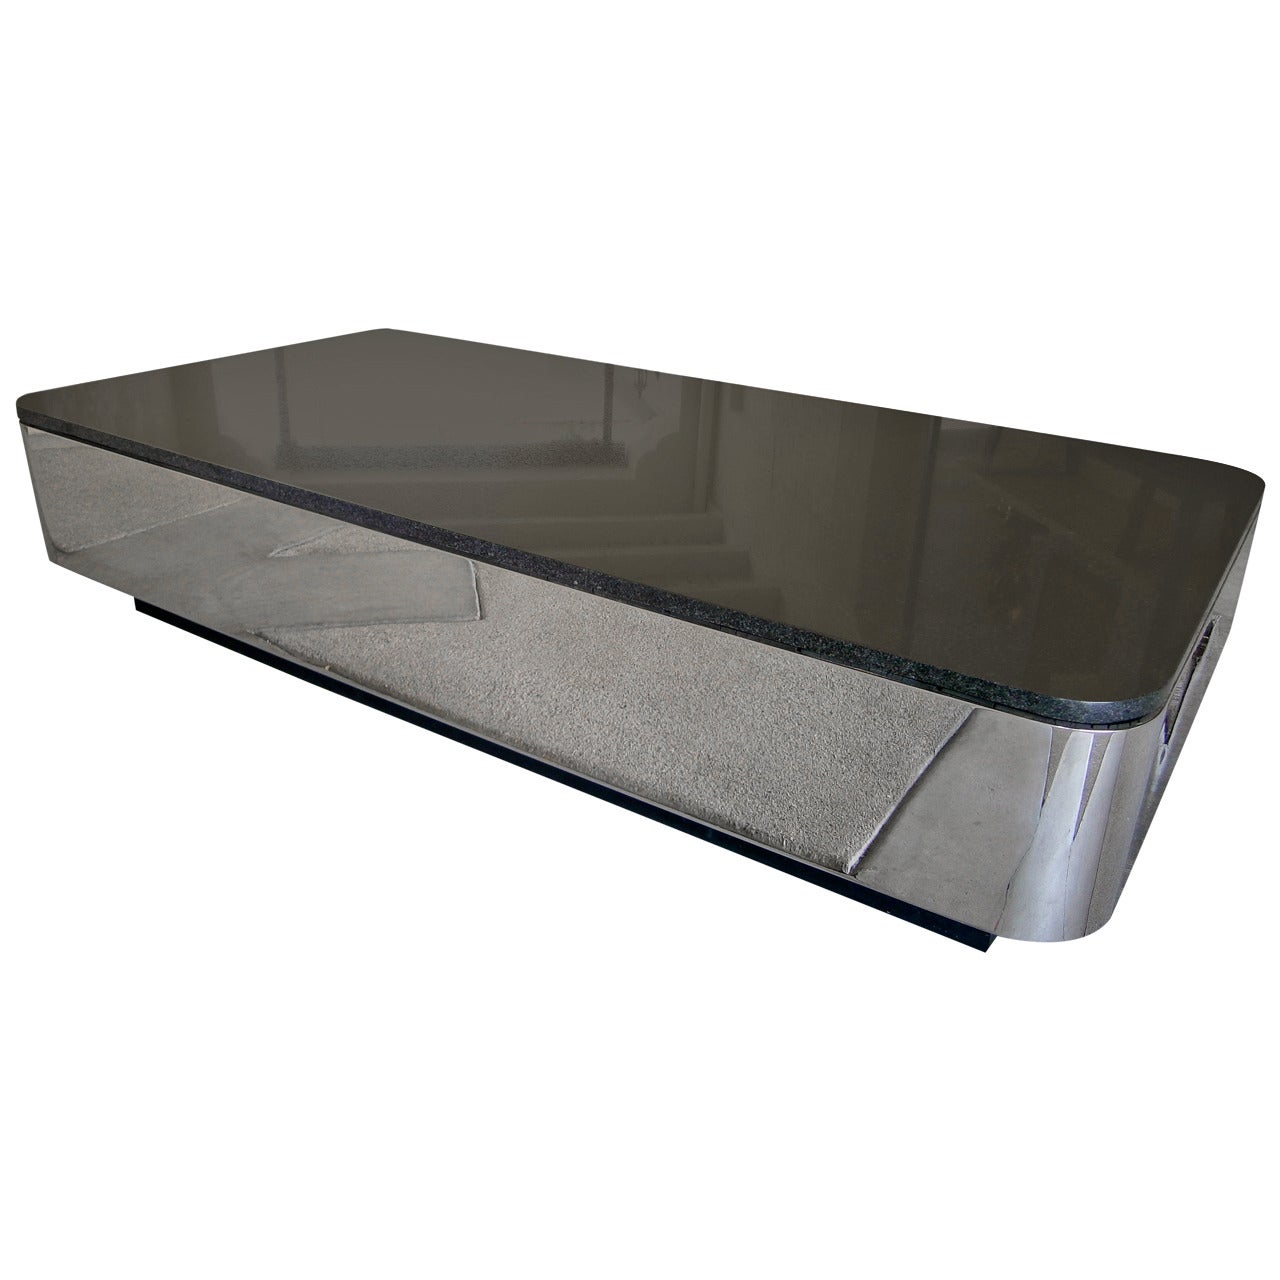 "The Grayboff Table" a Polished Steel & Granite Coffee Table by Brueton  C 1970s